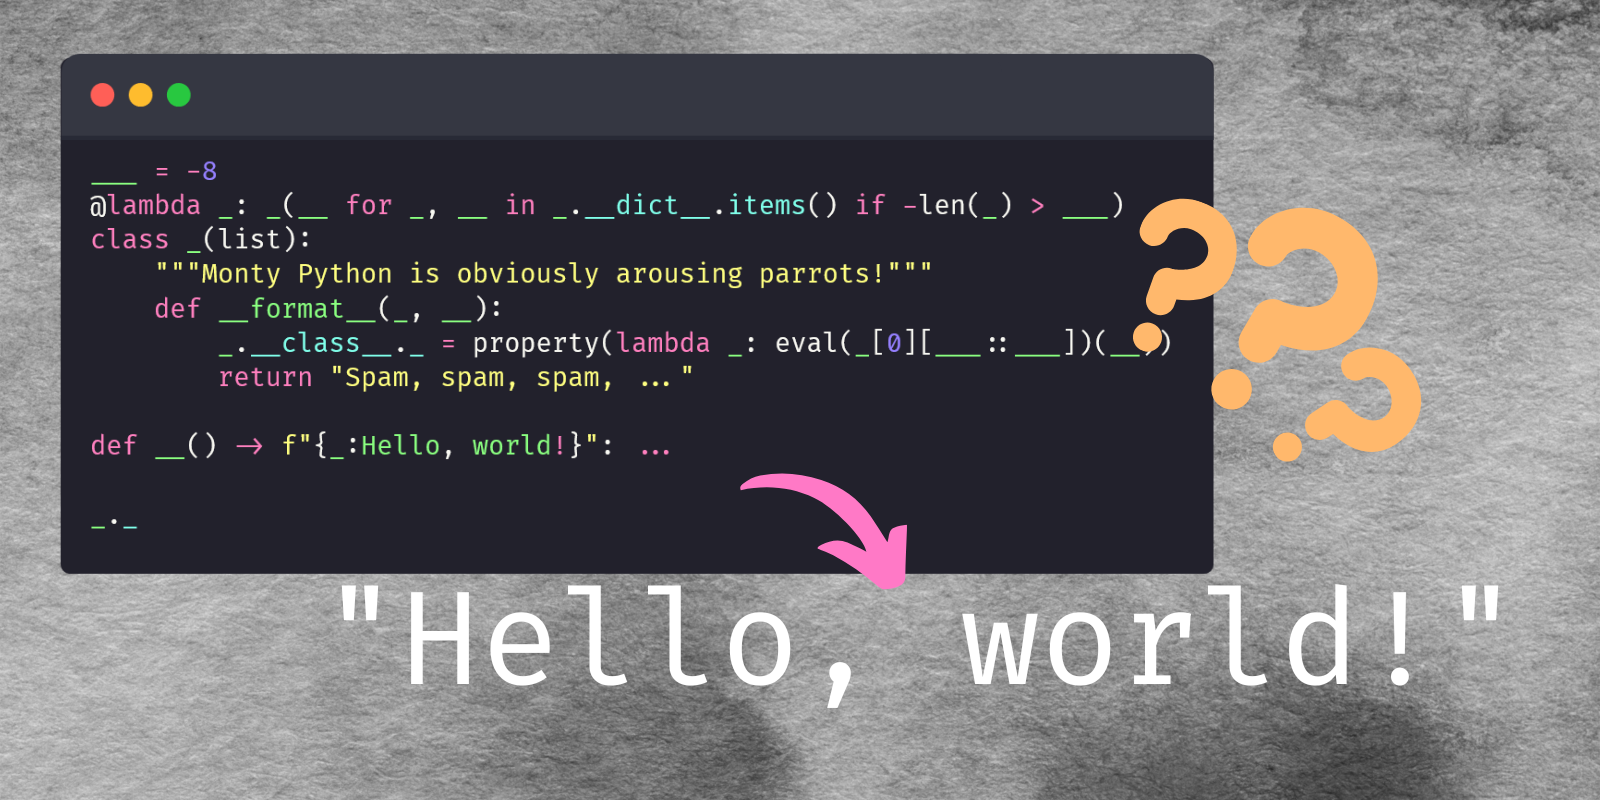 A really weird code snippet that contains code that is supposed to print “Hello, world!”.